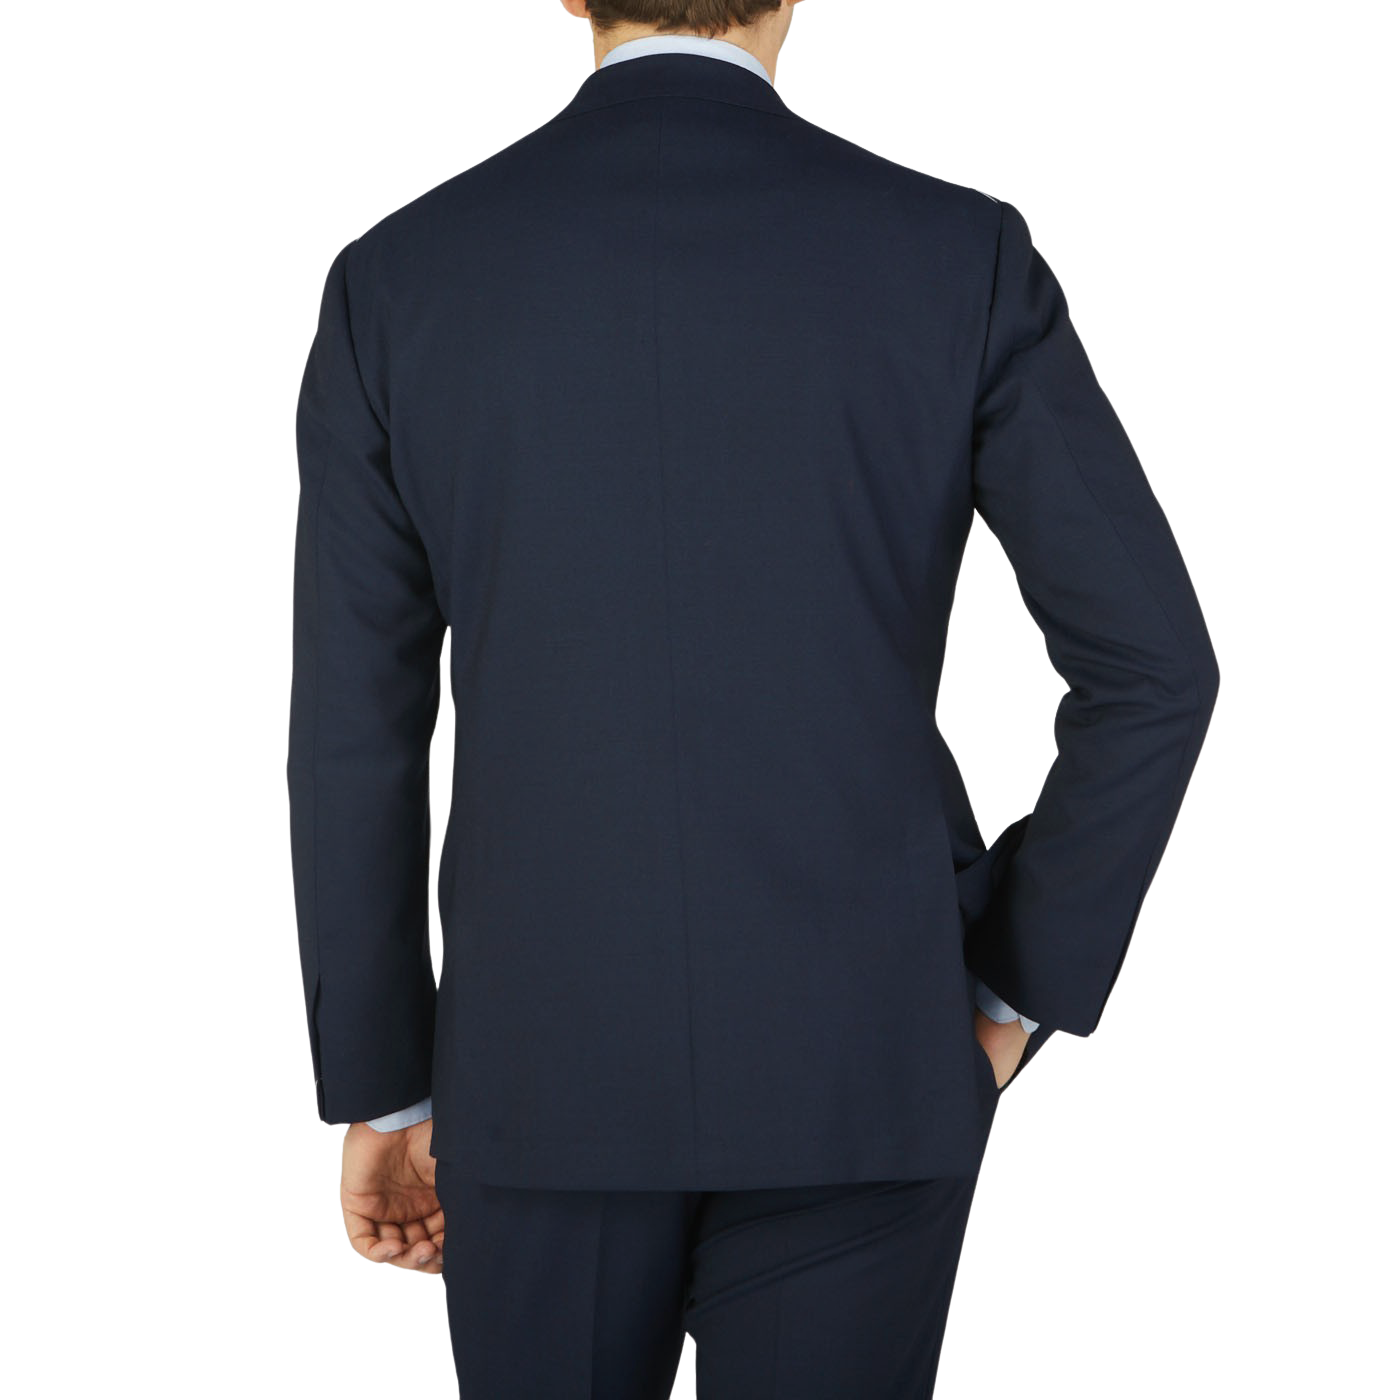 The back view of a man wearing a Ring Jacket Navy High Twist Wool Suit.